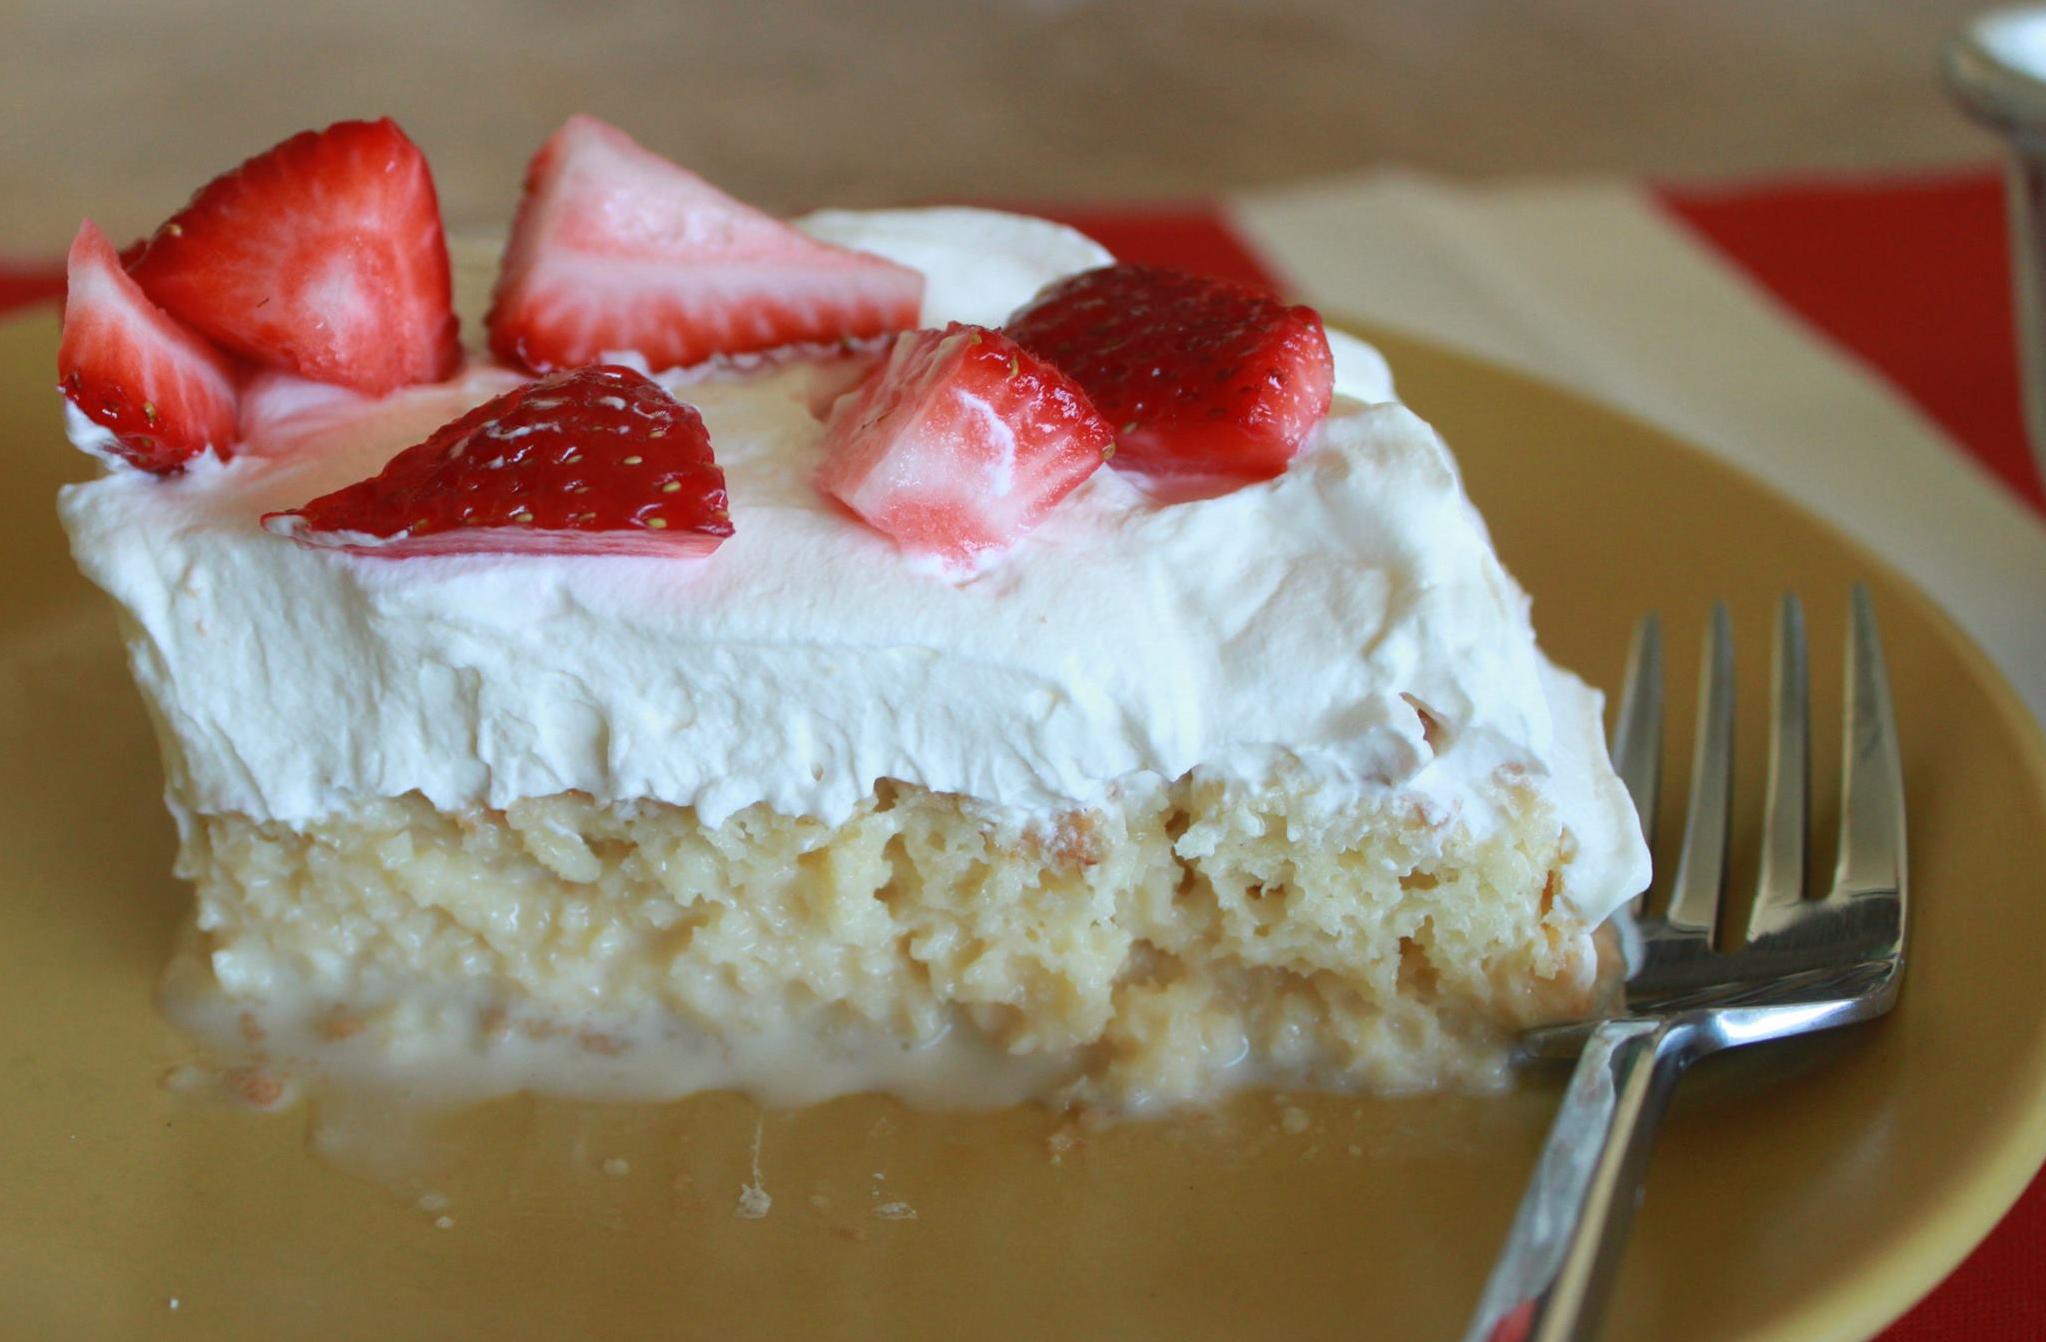  Rich and creamy tres leches cake, soaked in three types of milk